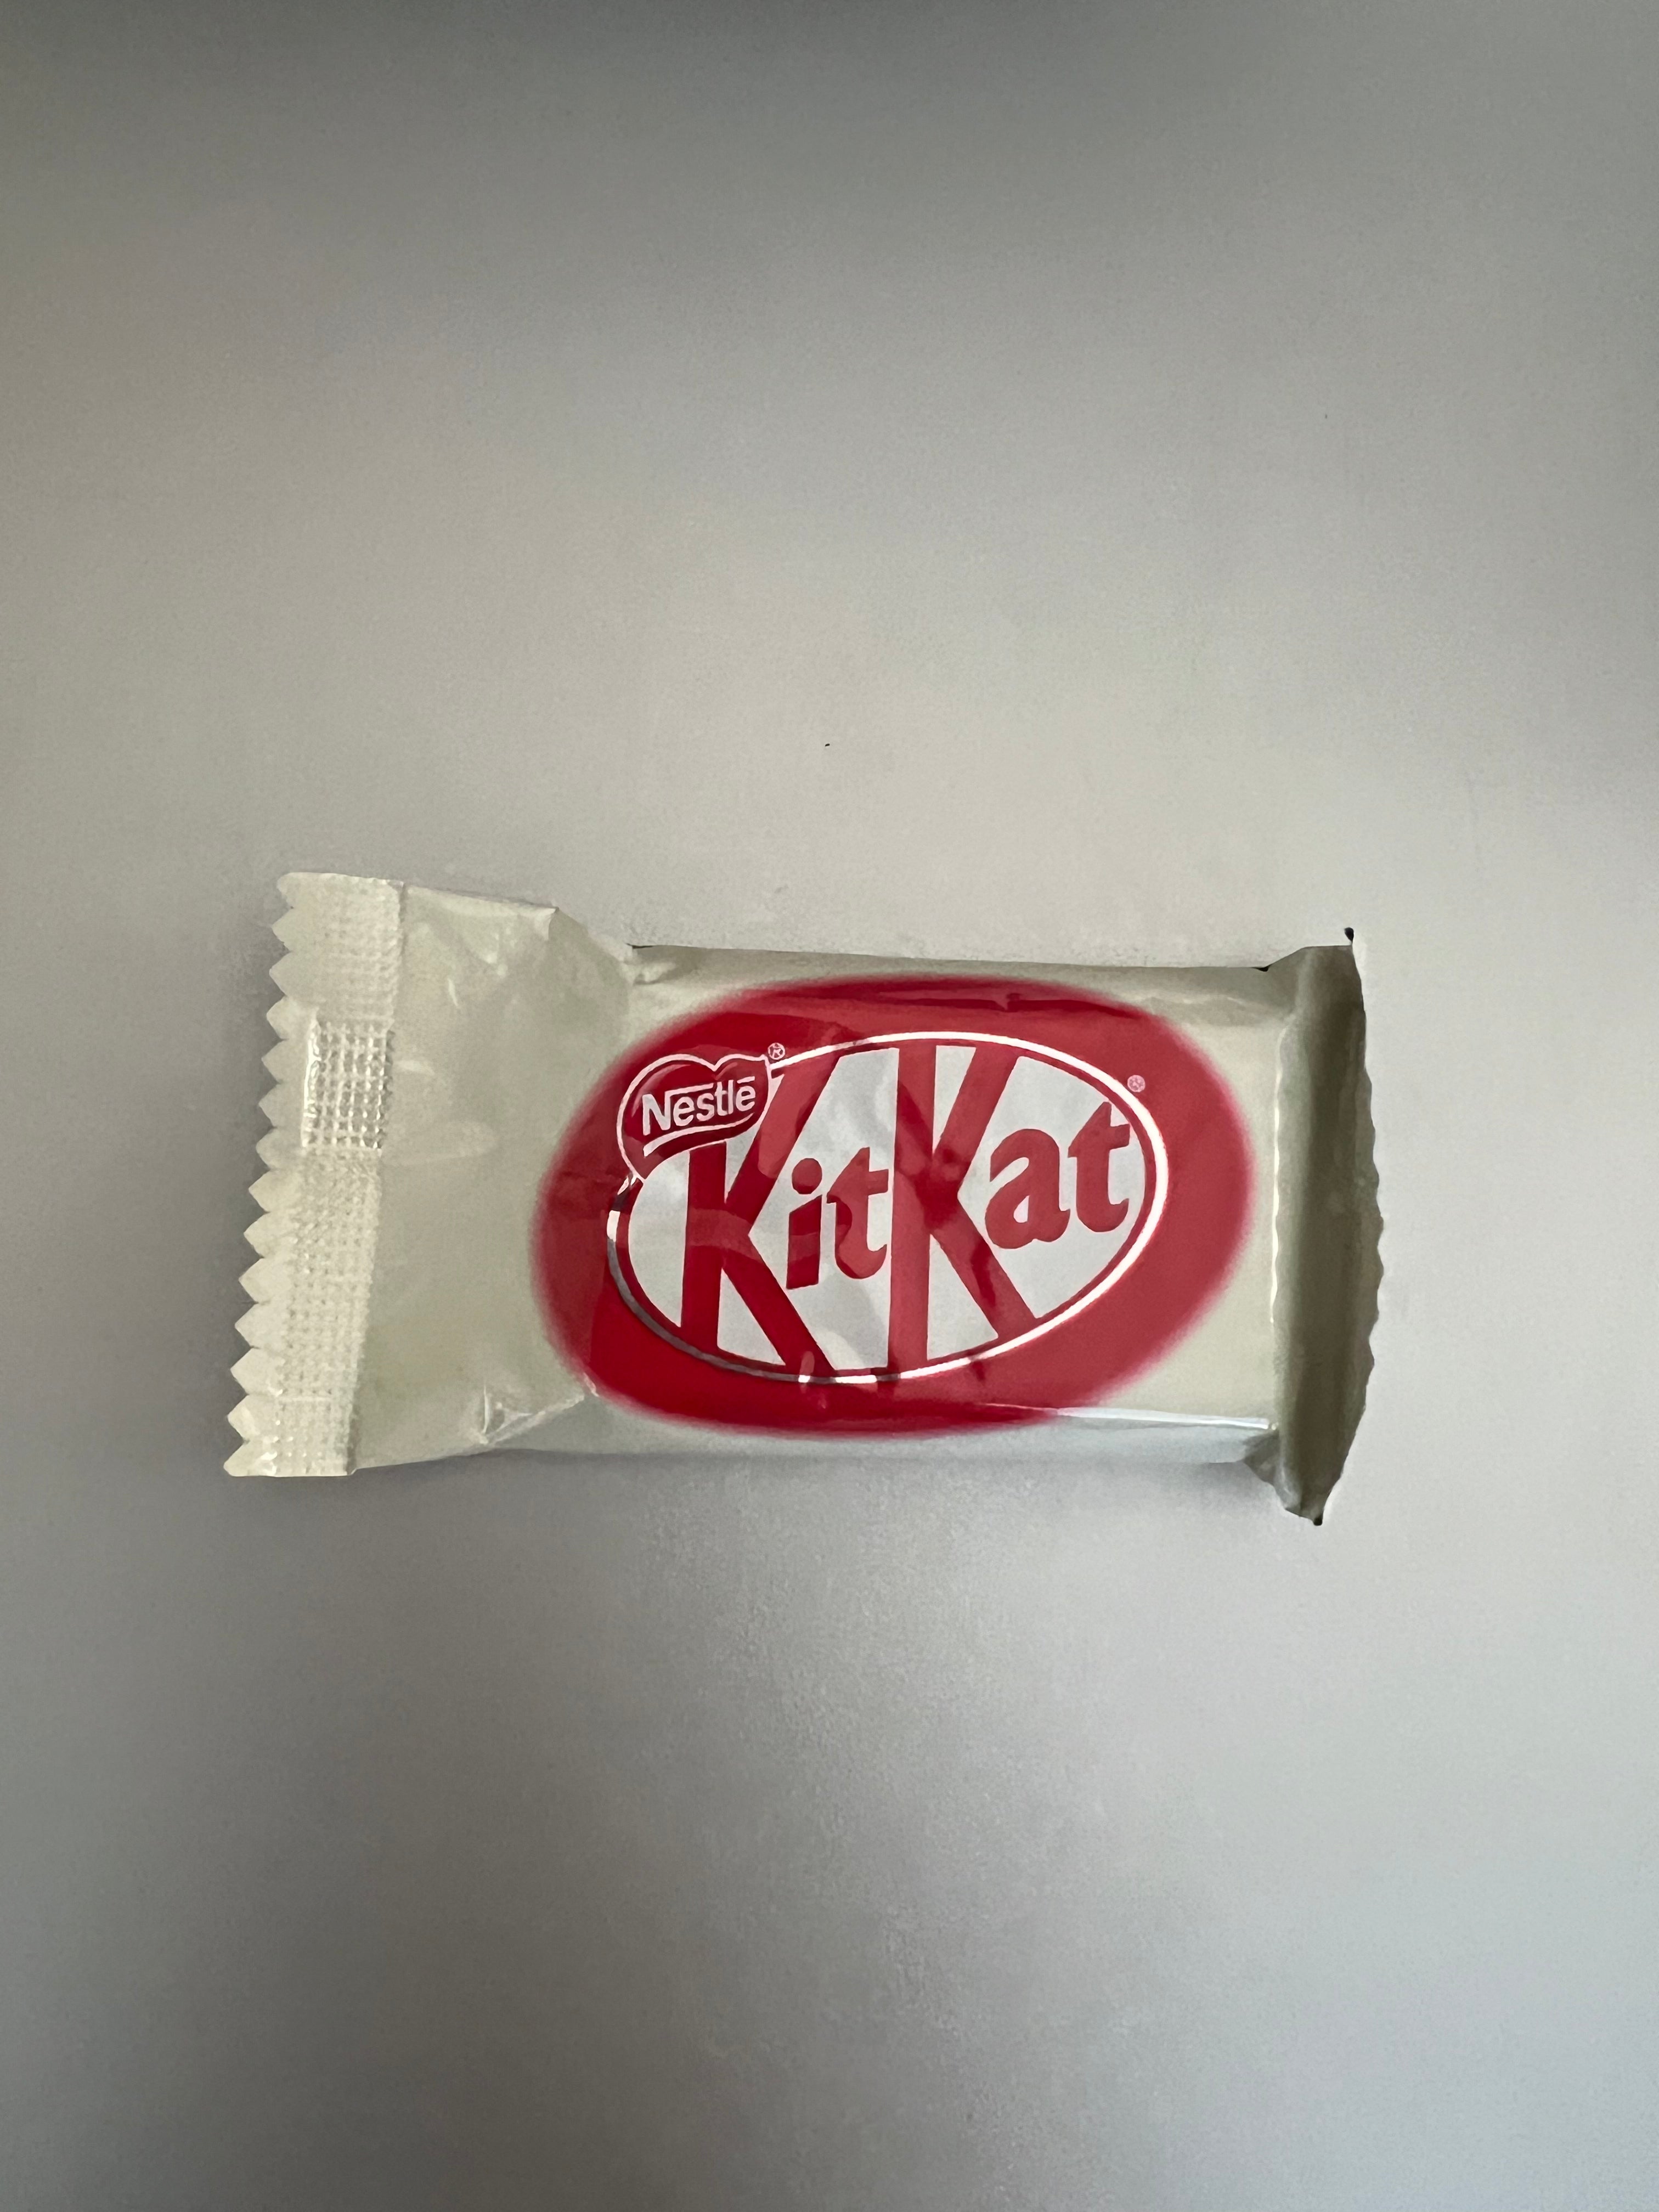 Kit Kat Red and White Chocolate Flavor